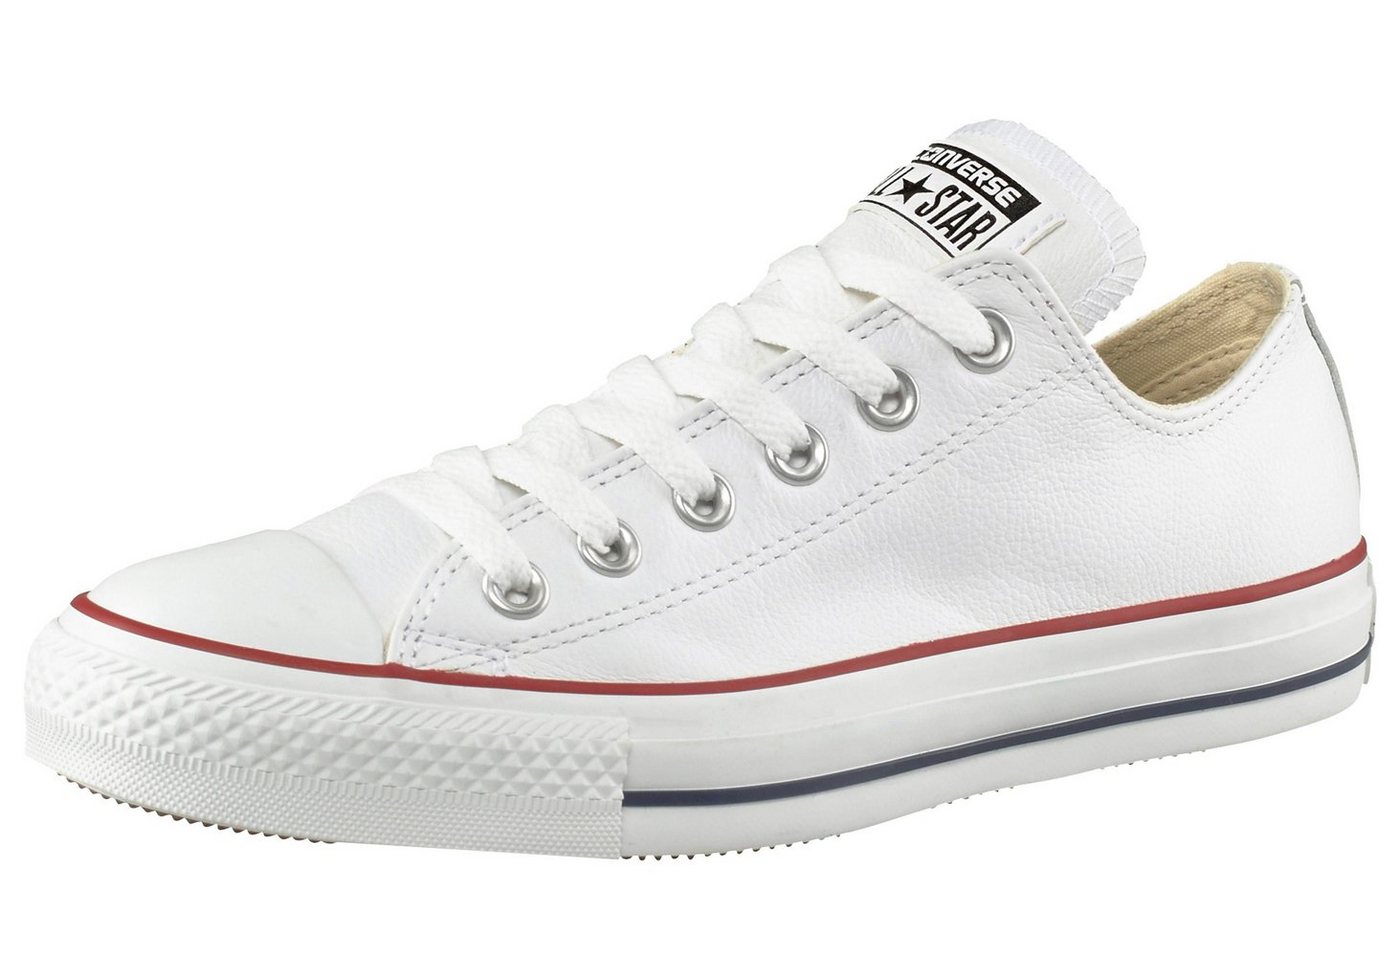 Converse Chuck Taylor All Star Basic Leather Ox Sneaker von Converse